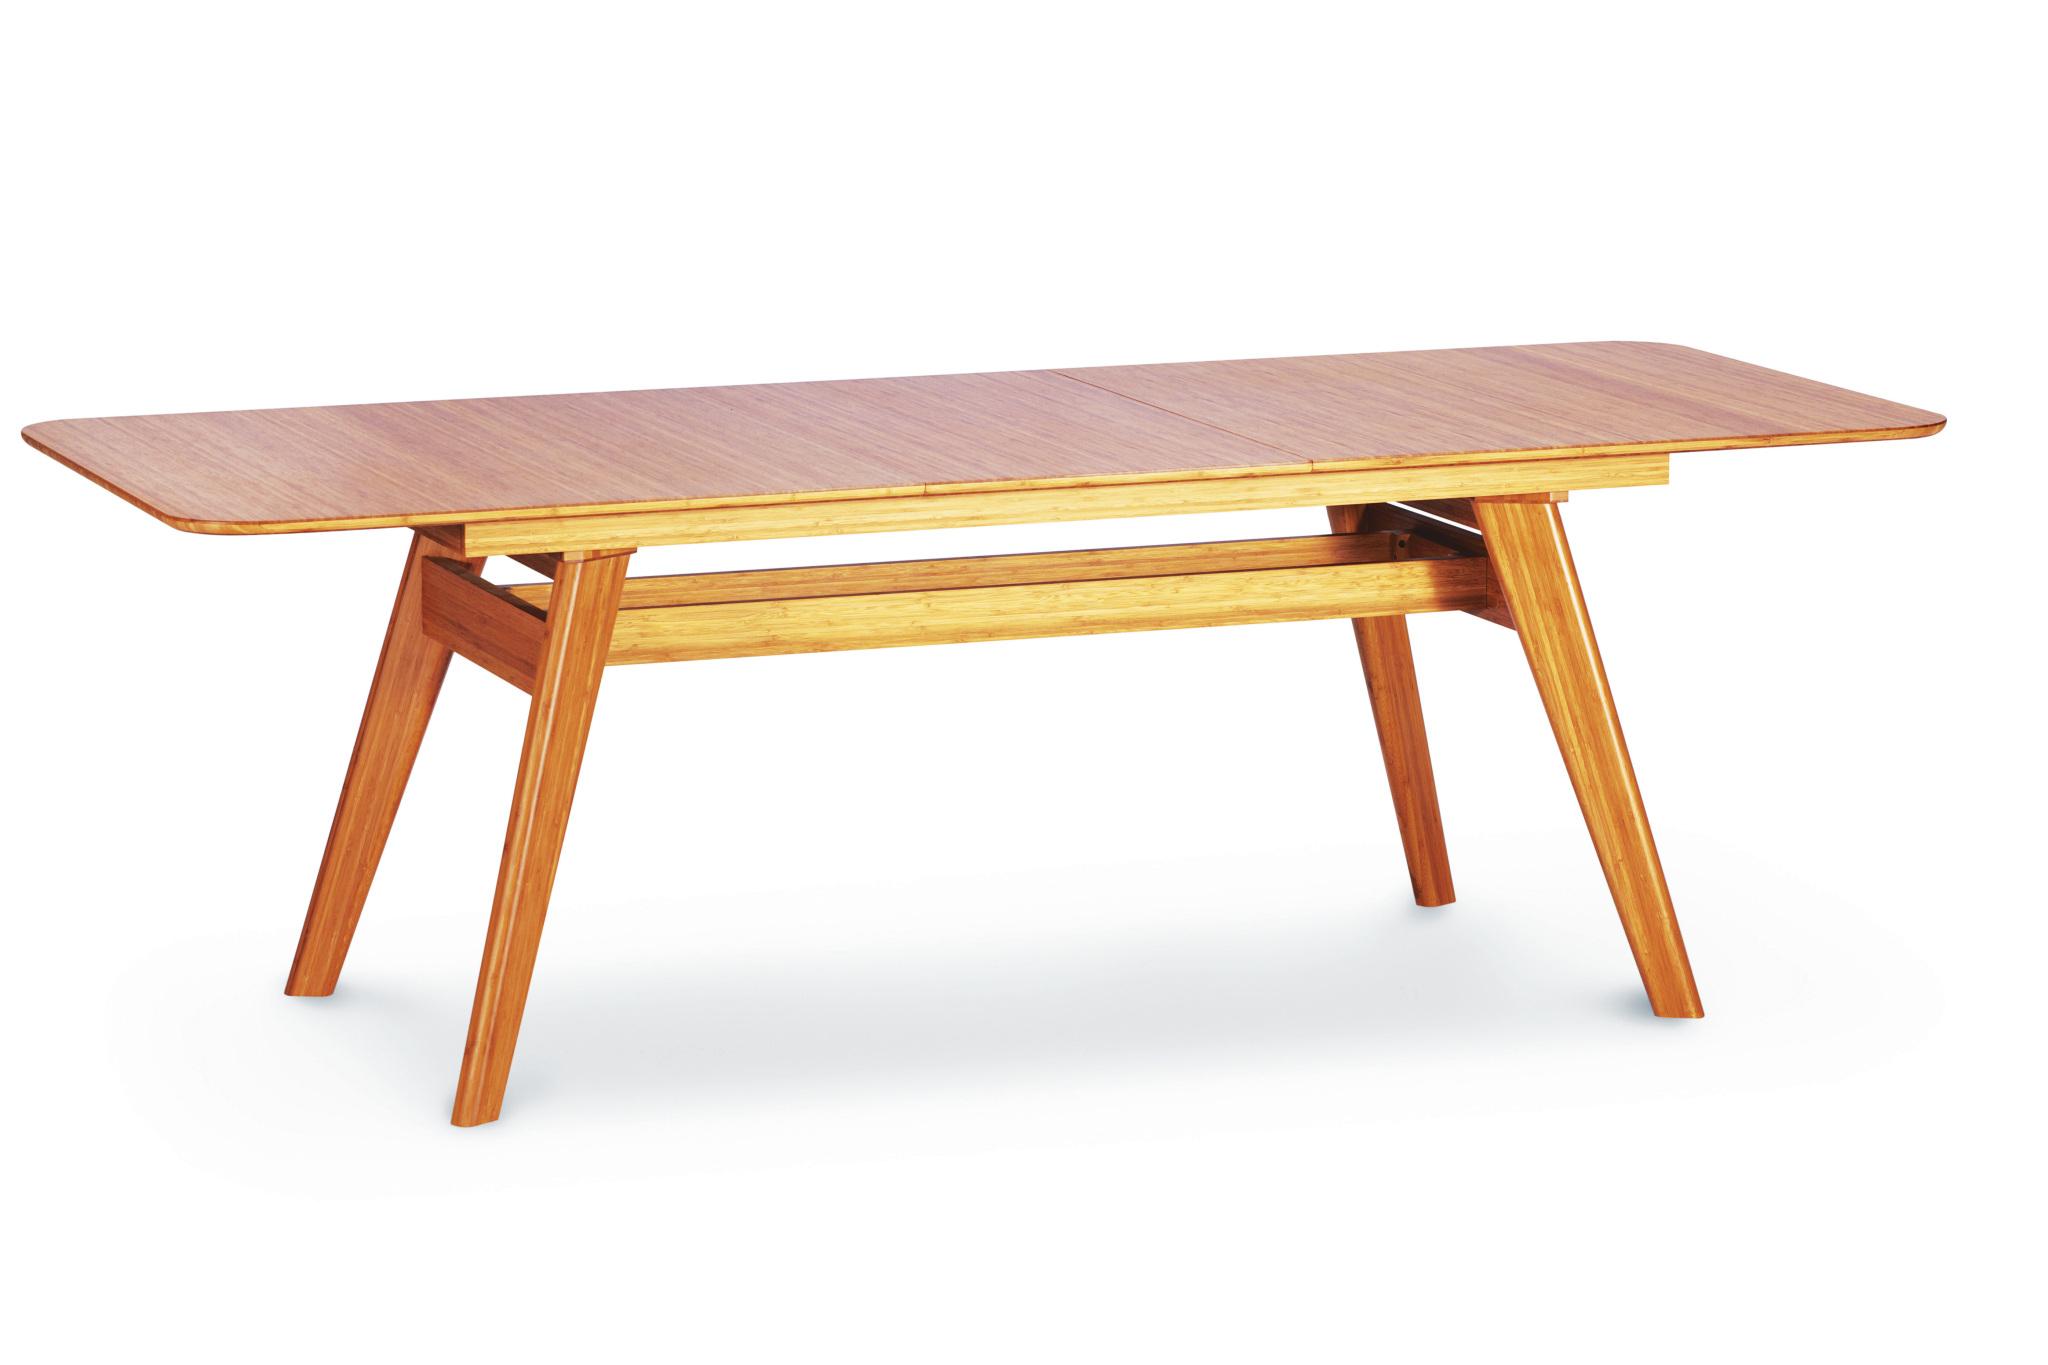 

    
Caramelized Bamboo Extension Dining Table Modern Currant by Greenington
